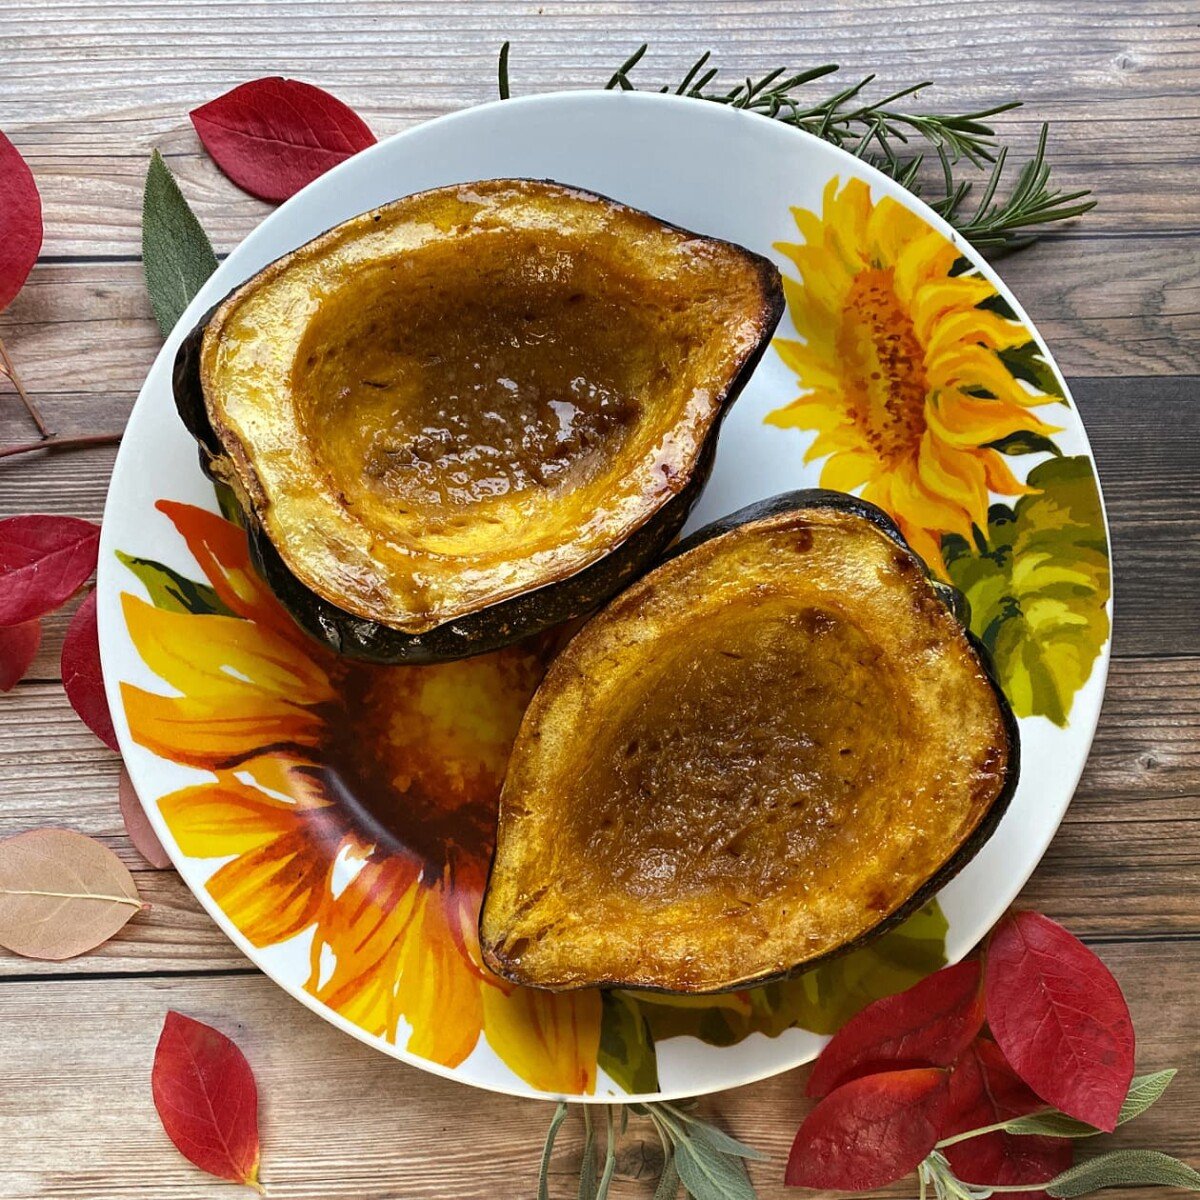 Two halves of a roasted acorn squash facing up on a plate decorated with sunflowers. 